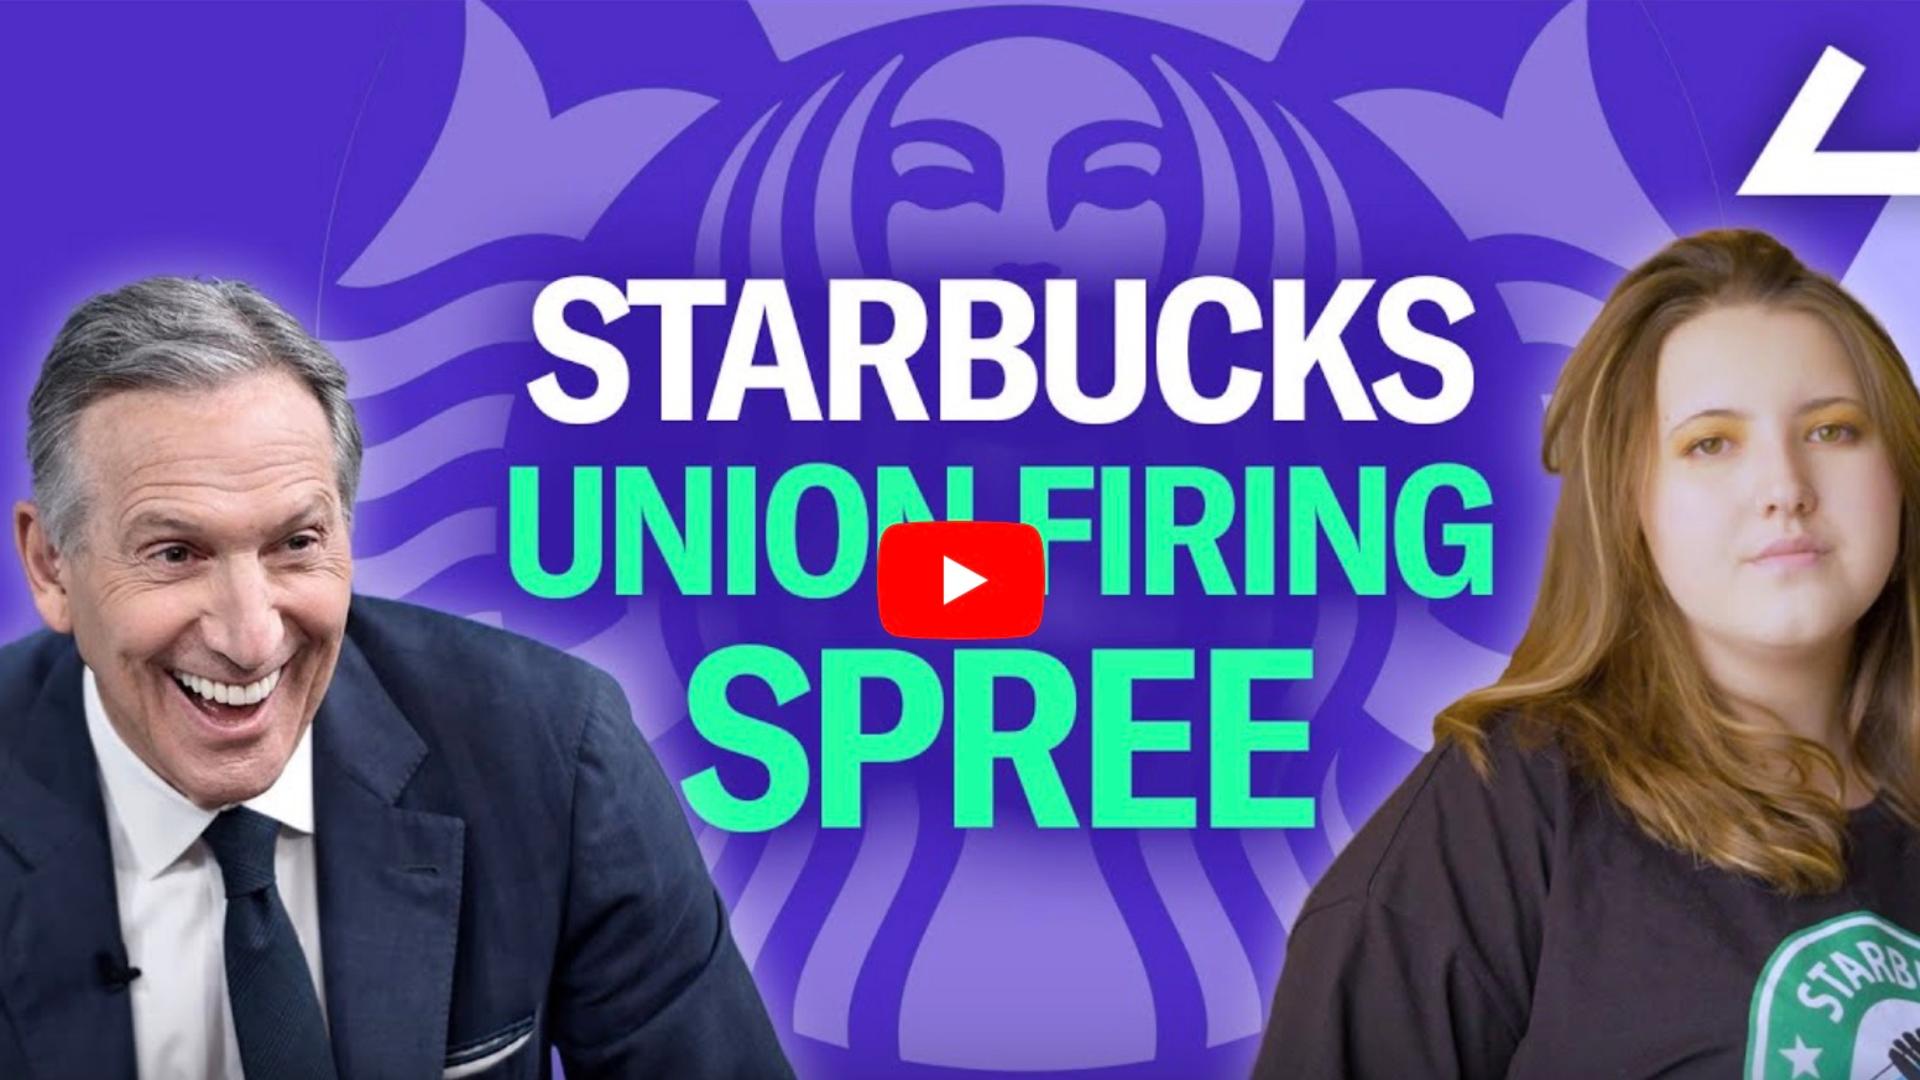 Starbucks Is Using Absurd Excuses to Fire Union Leaders